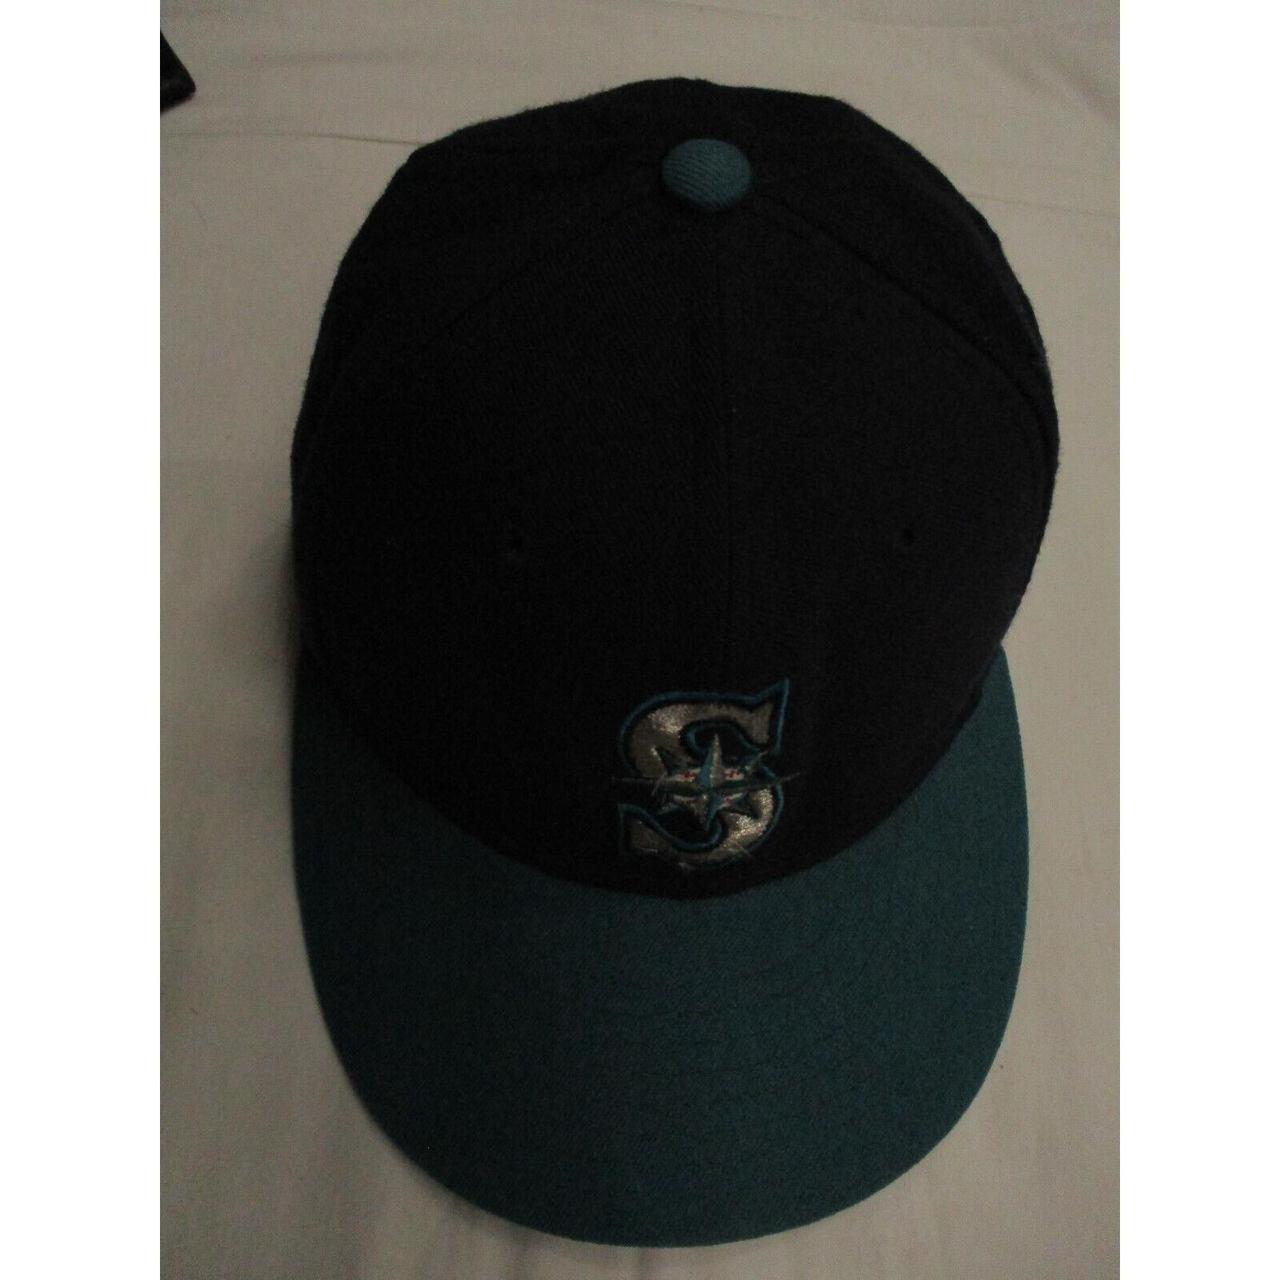 Vintage Seattle Mariners New Era Fitted Hat Size 7 1/8 Made in USA